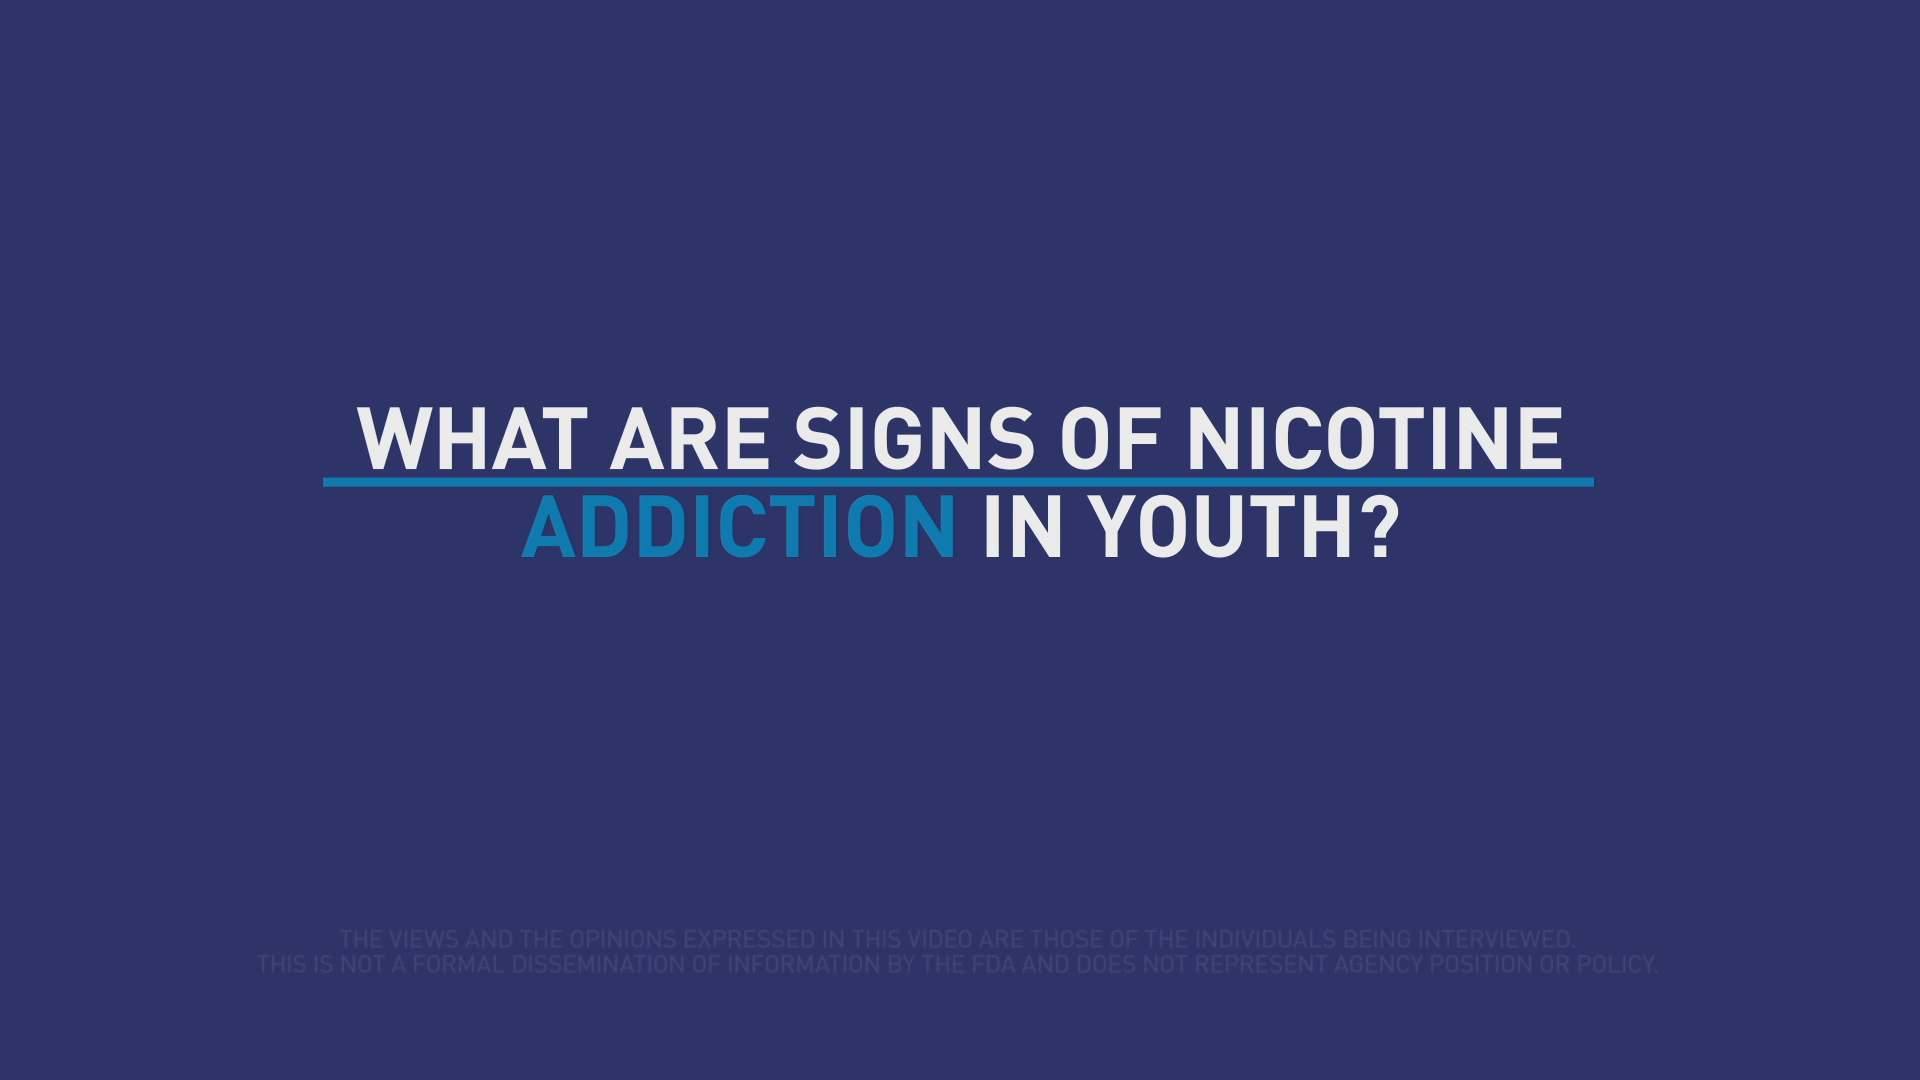 Nicotine exposure during adolescence affects brain functions important for reward processing, which makes it easier for youth to become addicted to nicotine. Learn more: https://go.usa.gov/xzzXF via @FDATobacco.